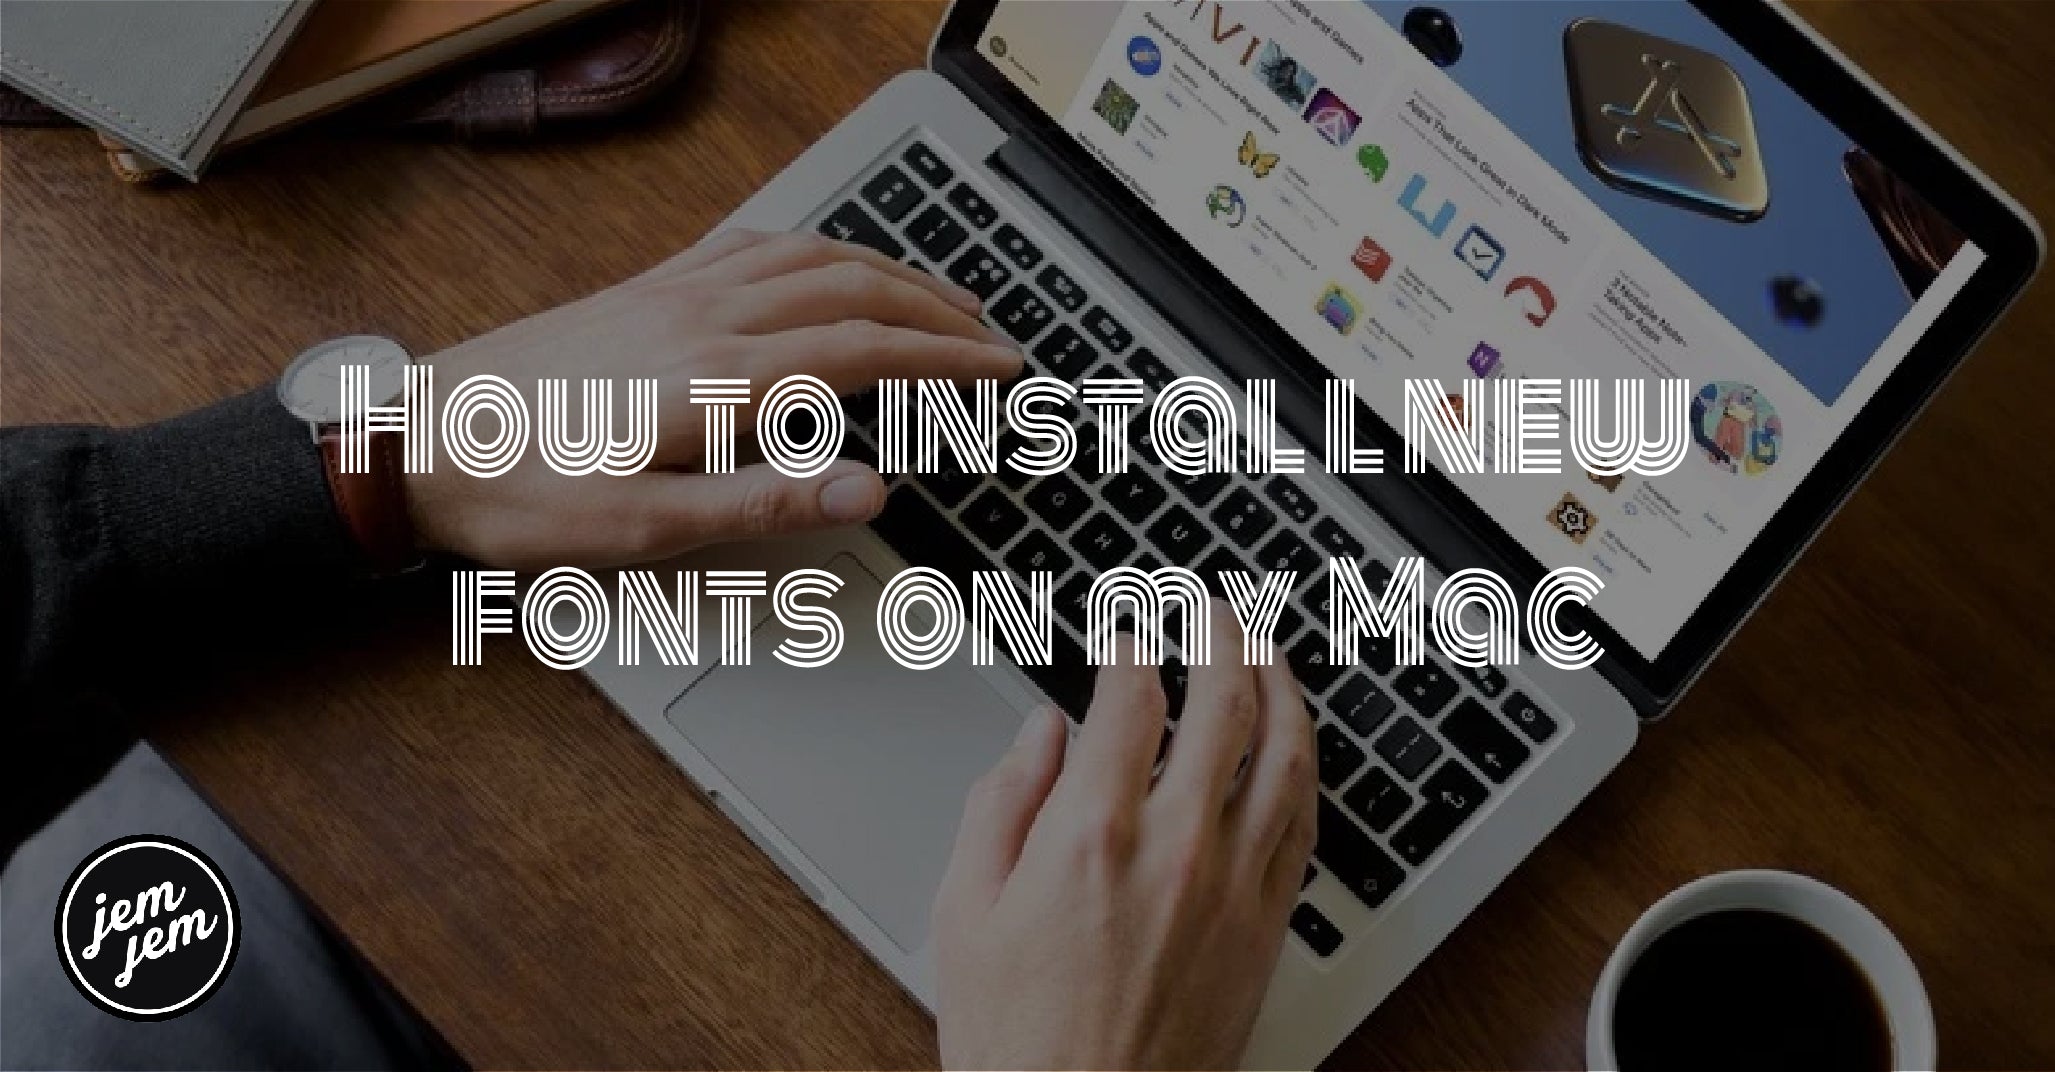 How to install new fonts on my Mac